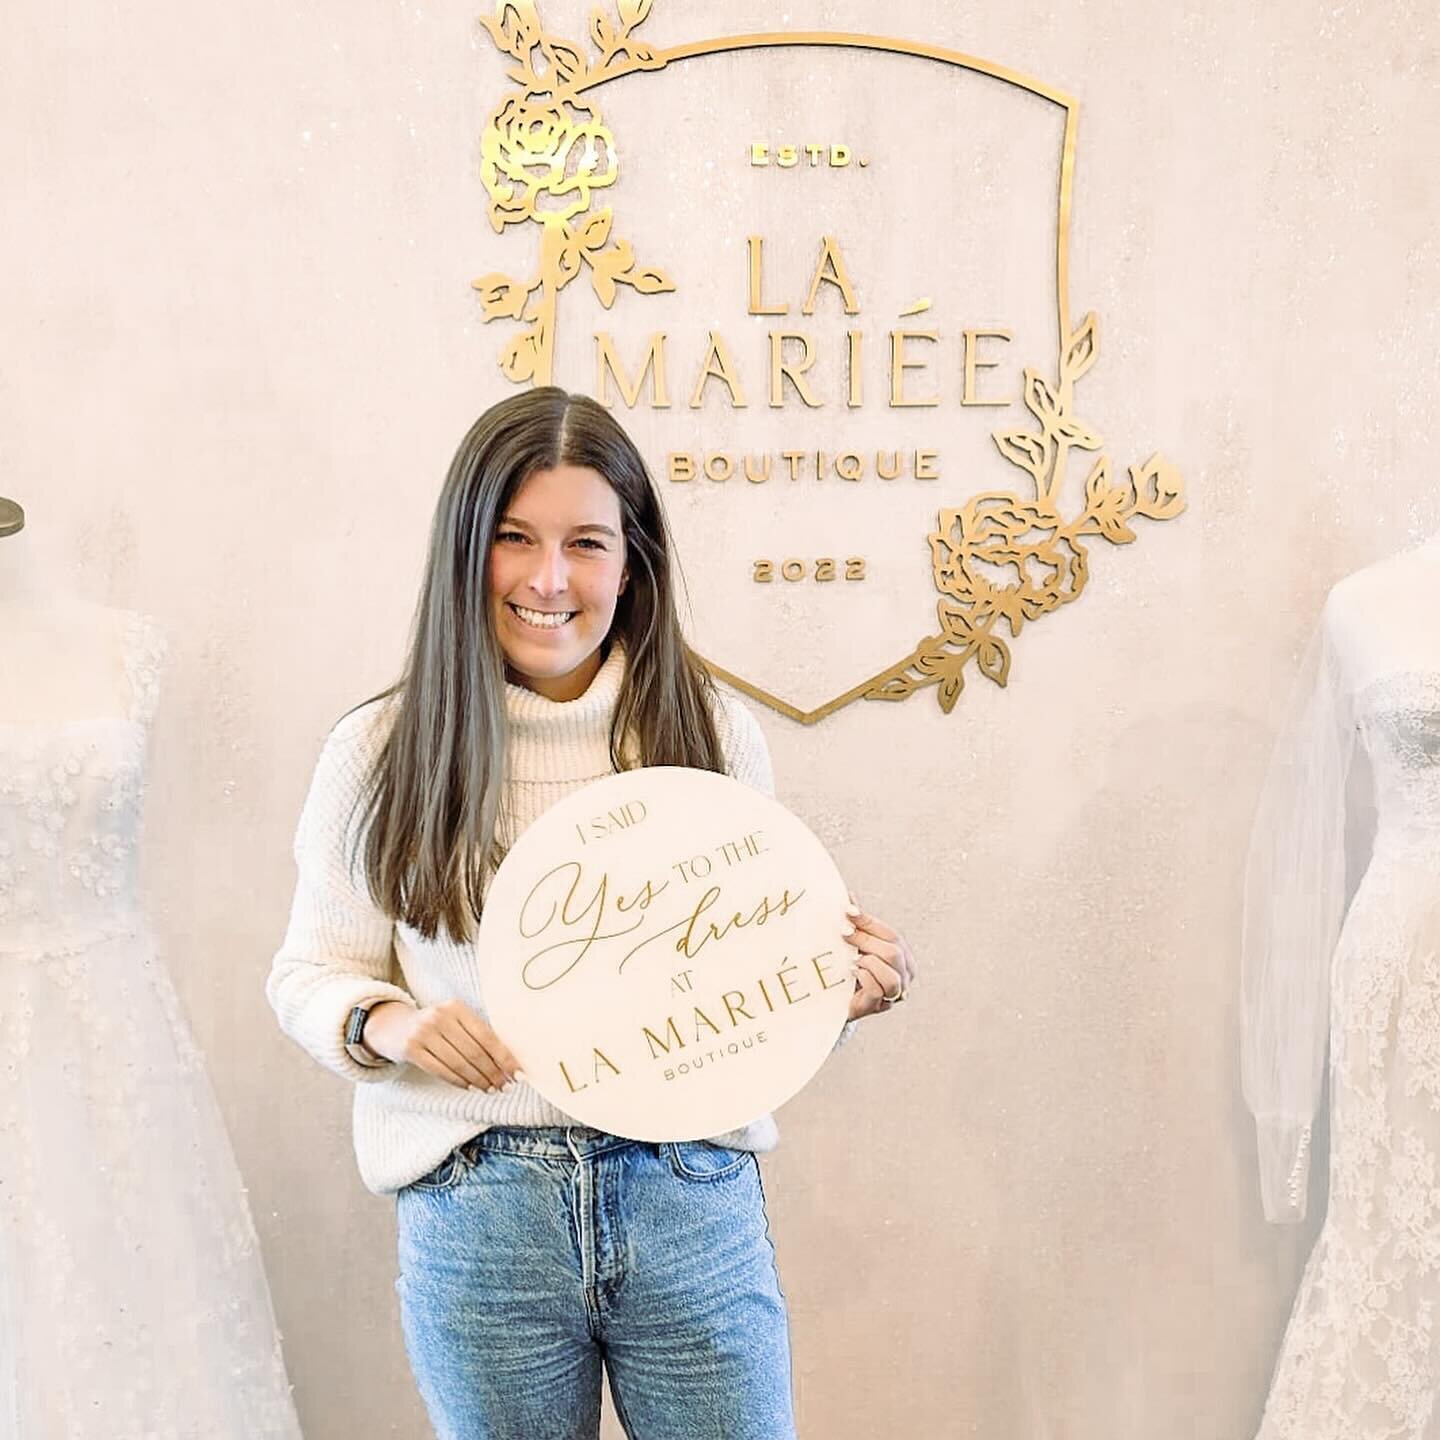 A chilly weekend spent with some amazing brides who warmed our hearts! ❄️🫶 Each of these lovely ladies said yes to their dream wedding dress and they were l so unique and spectacular! We helped two of these gorgeous brides design their own custom we